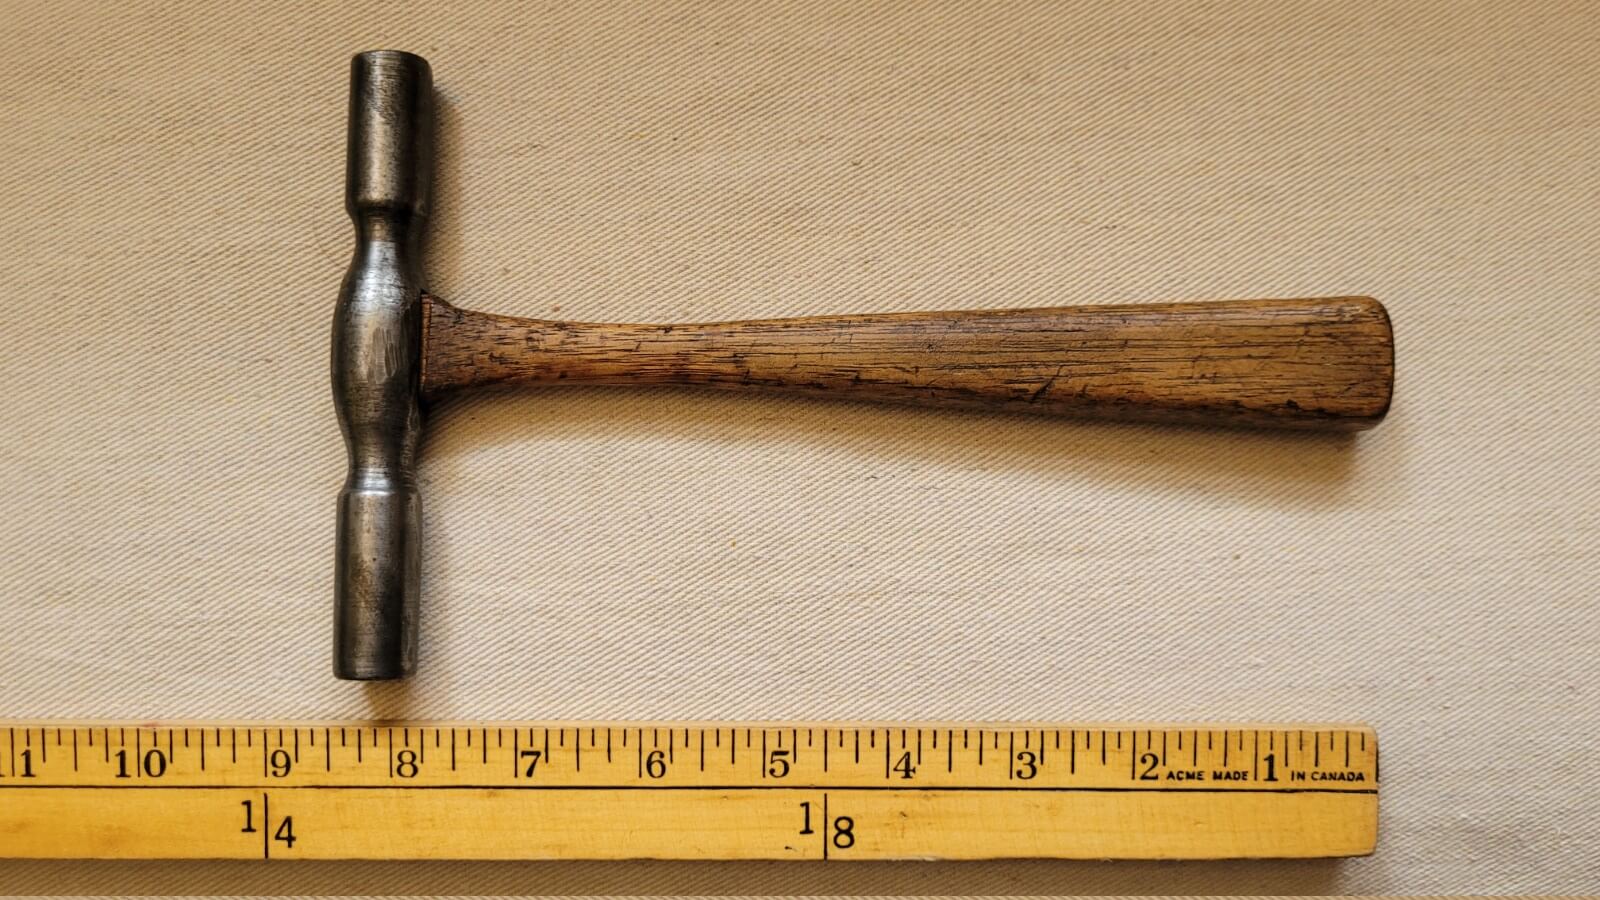 Antique Miniature Spike Maul Hammer w Wooden Handle 8.5 Inches - Vintage Hand Tool Collectibles